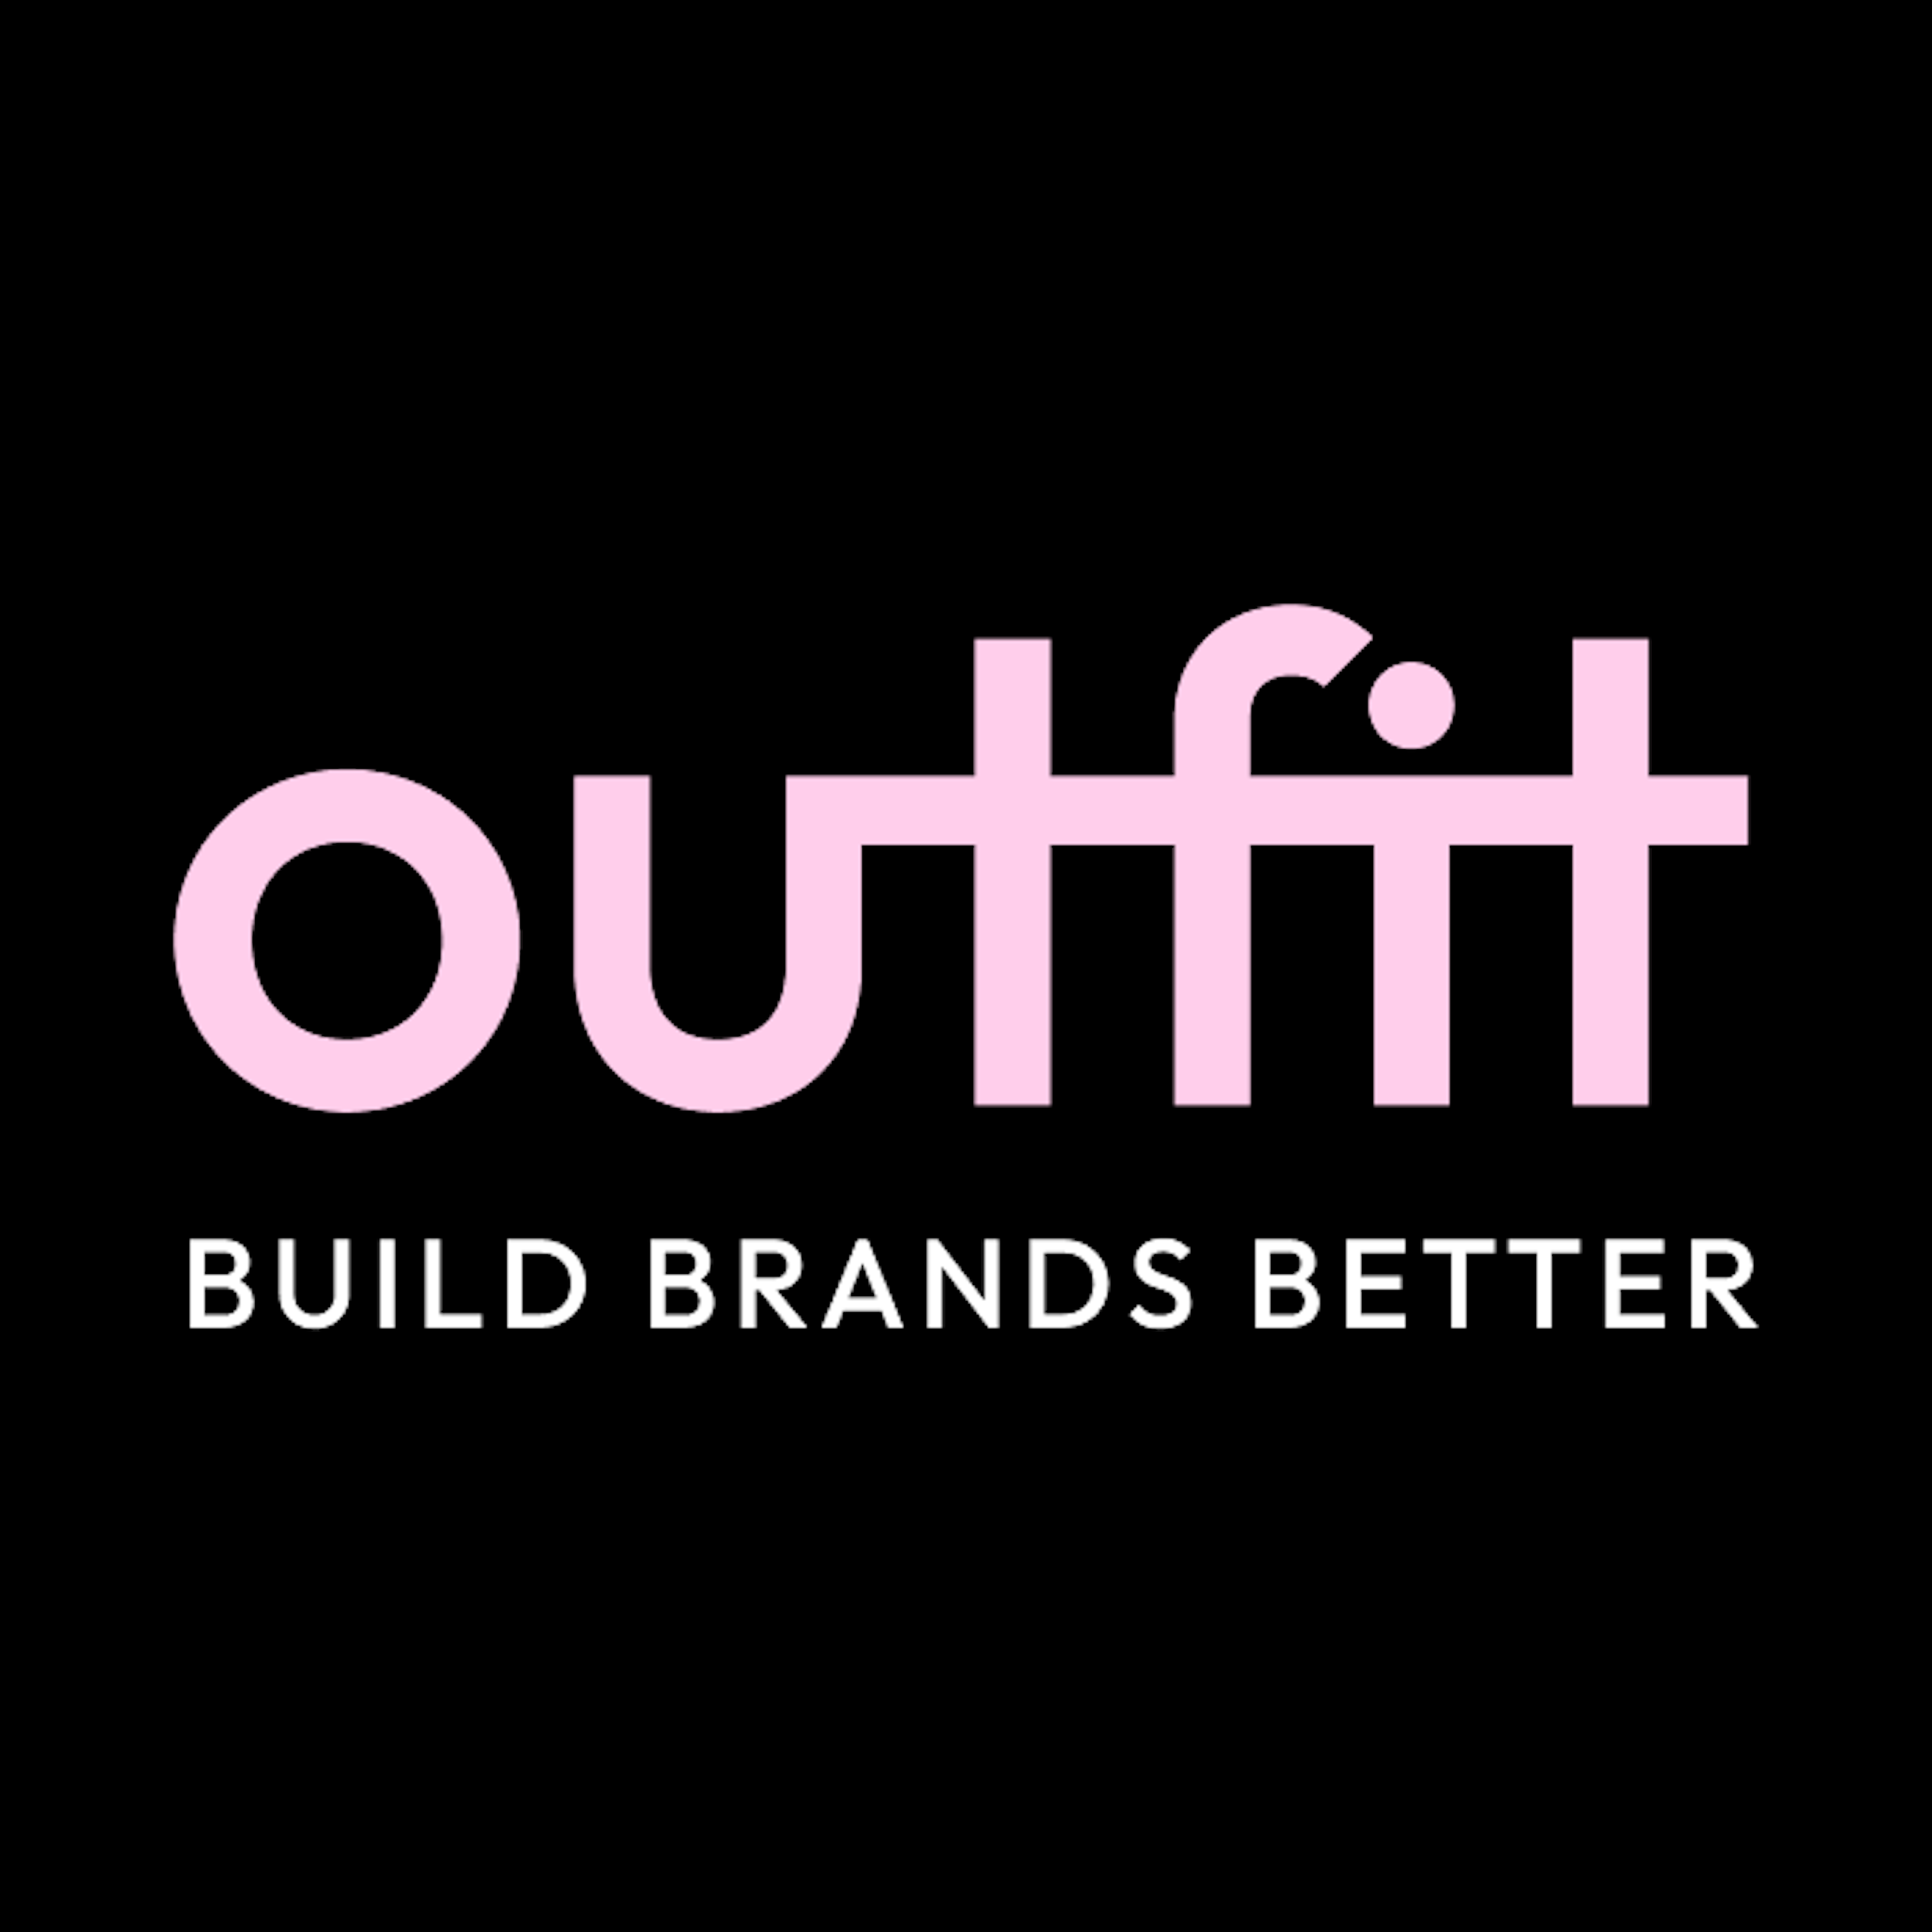 Outfit Logo